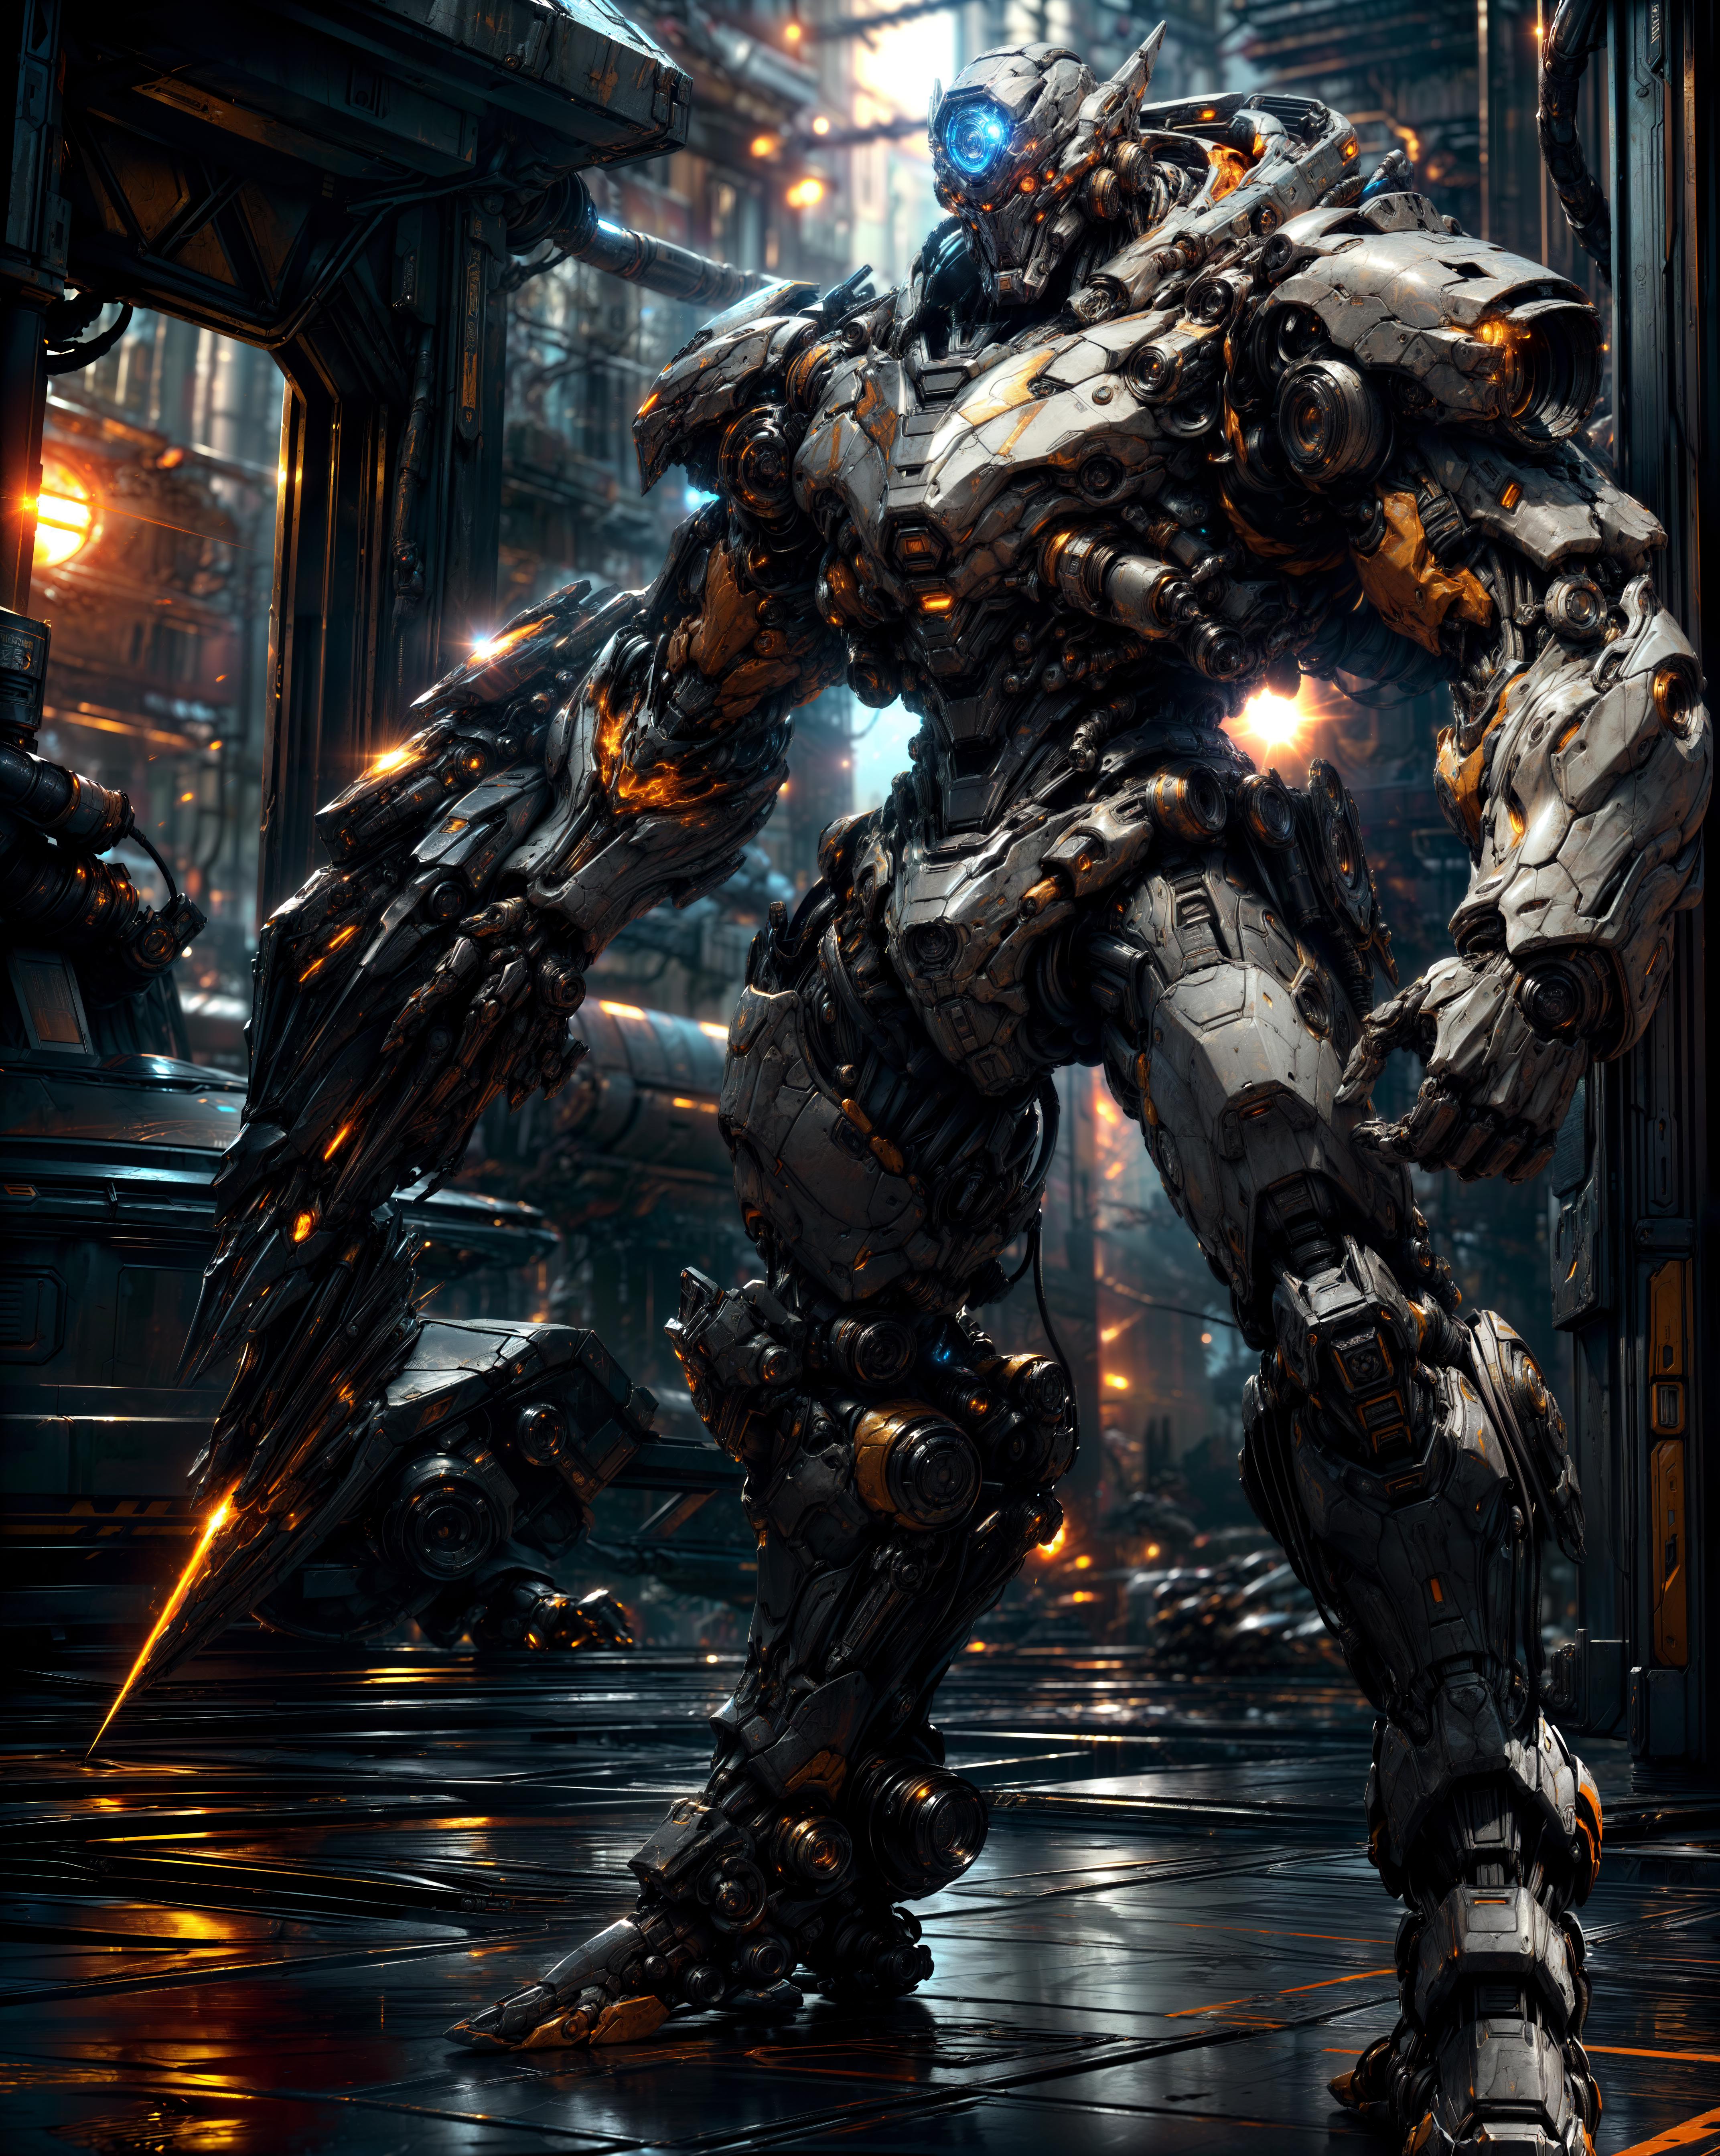 A large robot walking through a dark room with an orange glow and a sword attached to its arm.